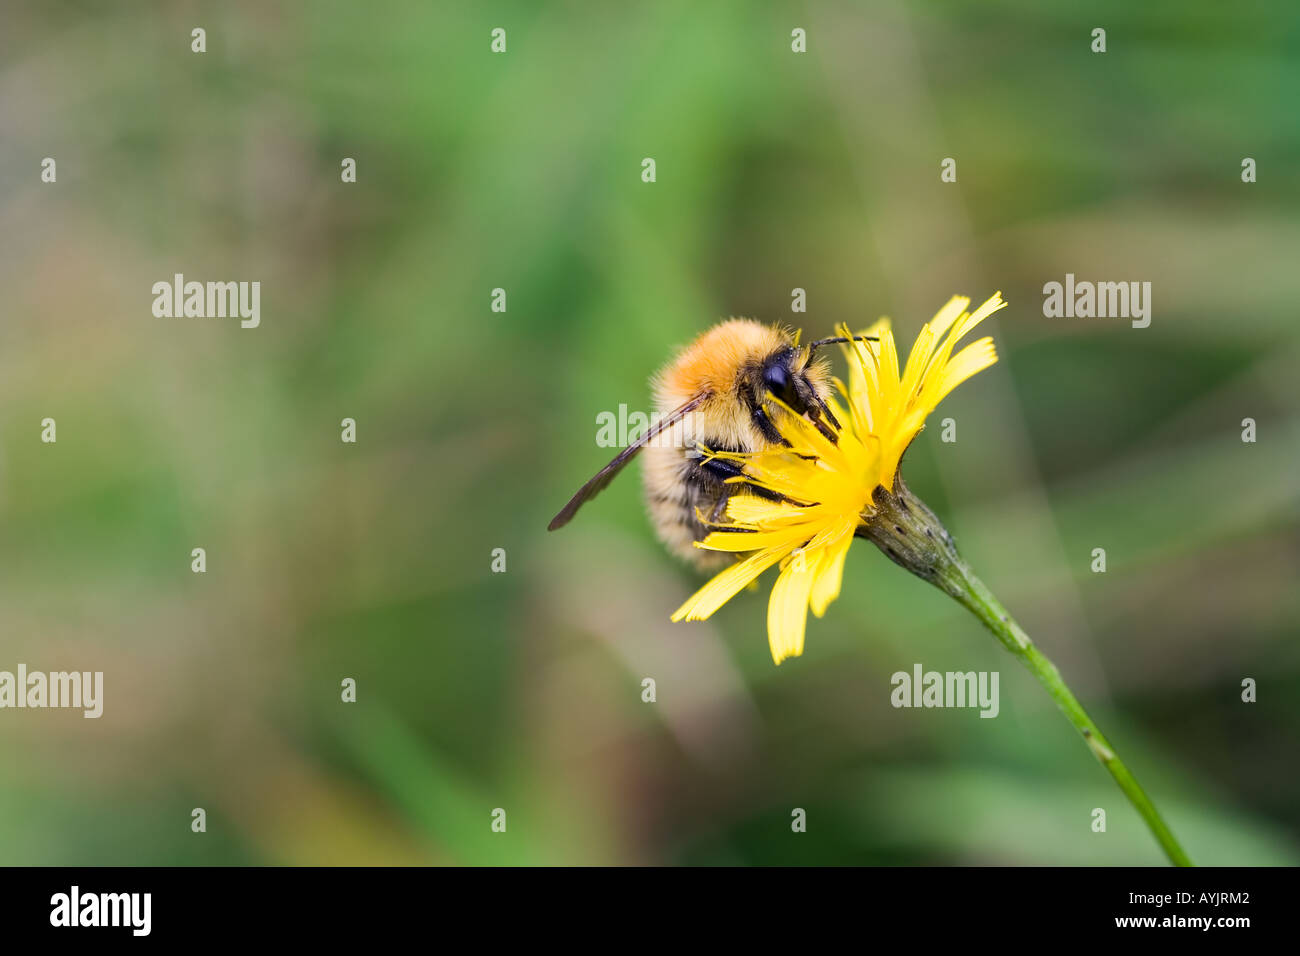 bumble bee on a dandelion gathering pollen Stock Photo